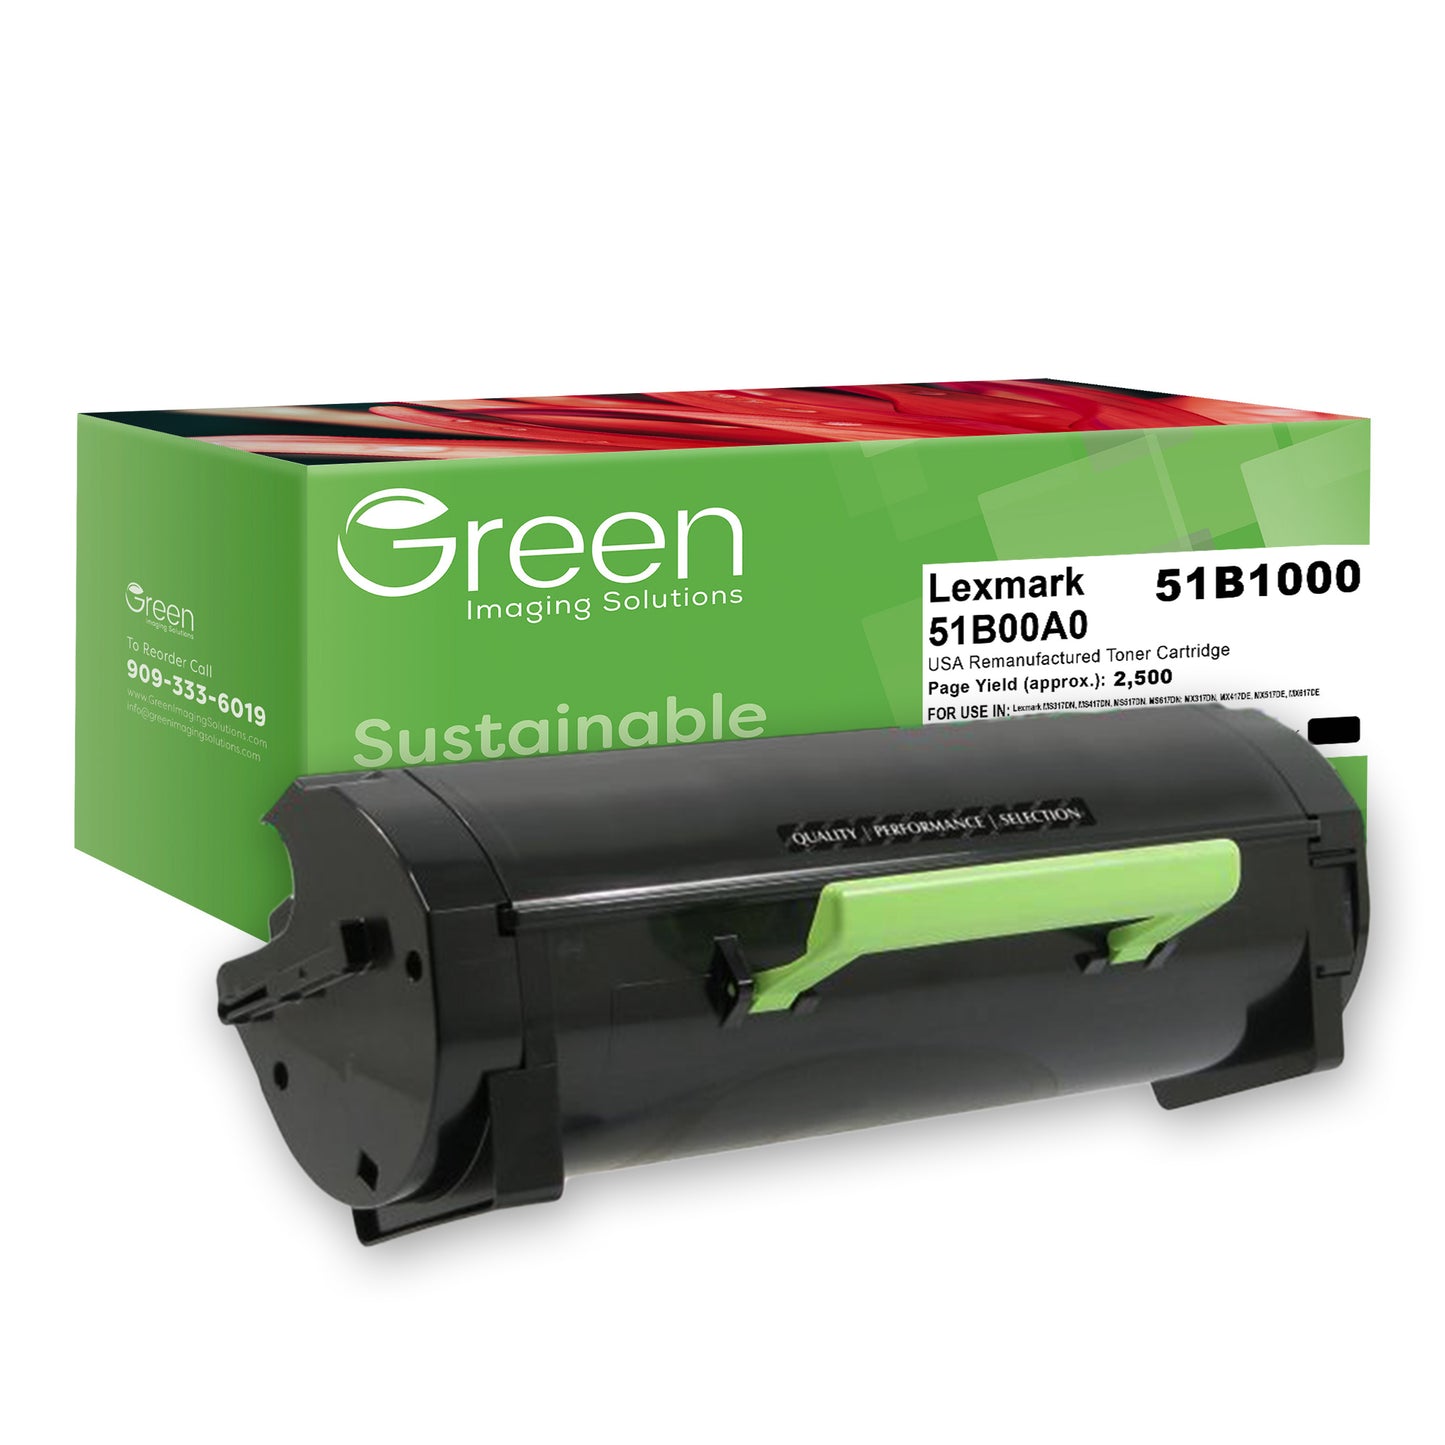 Green Imaging Solutions USA Remanufactured Toner Cartridge for Lexmark MS317/MS417/MX317/MX417